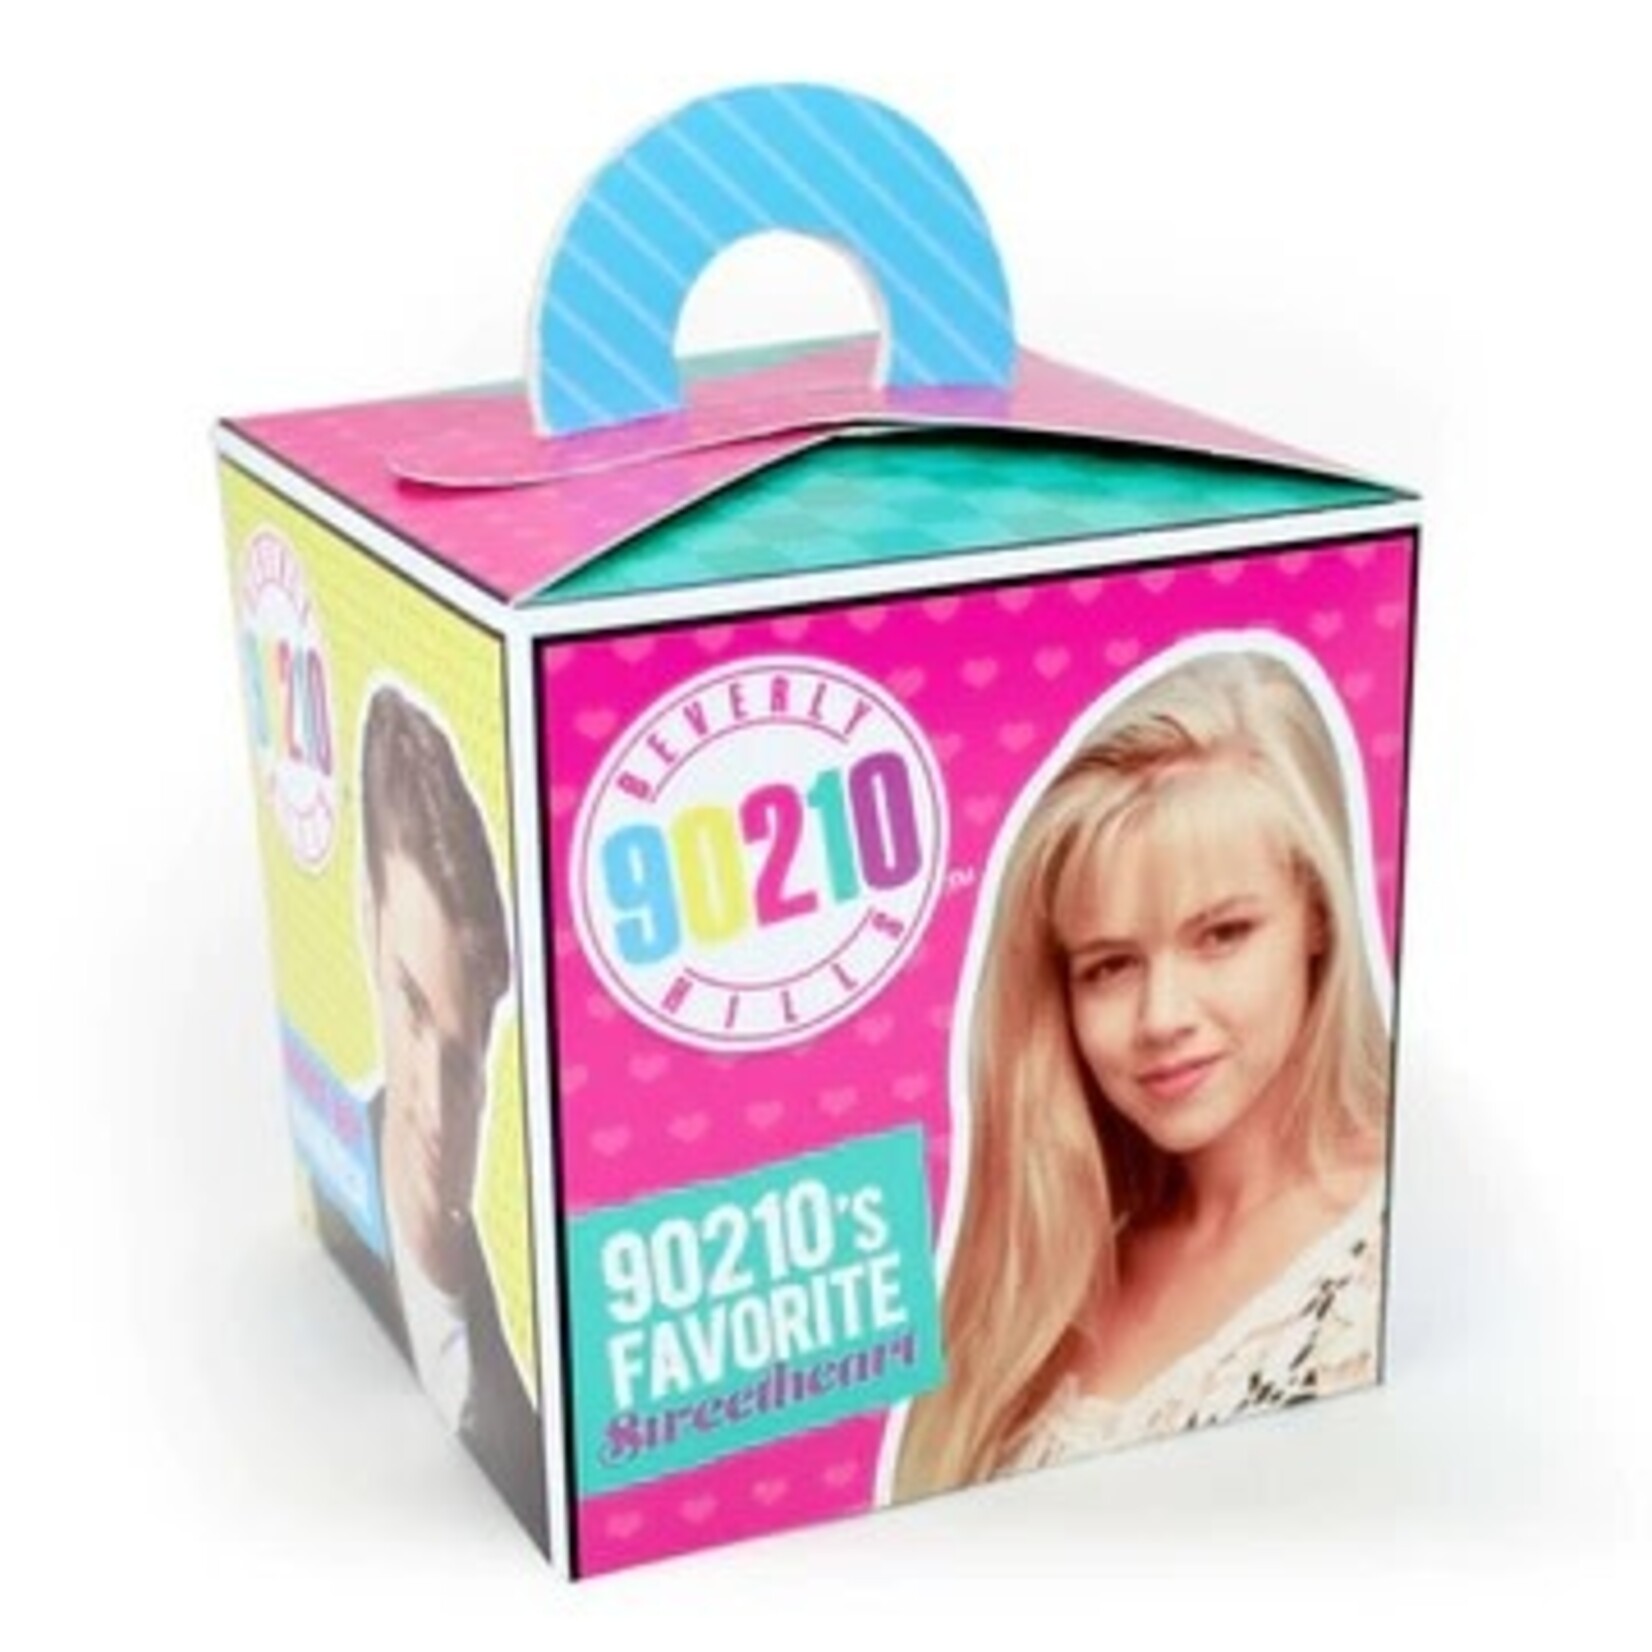 Prime Party Beverly Hills 90210 Party Favor Boxes - 8ct. (5"  5" x 5")